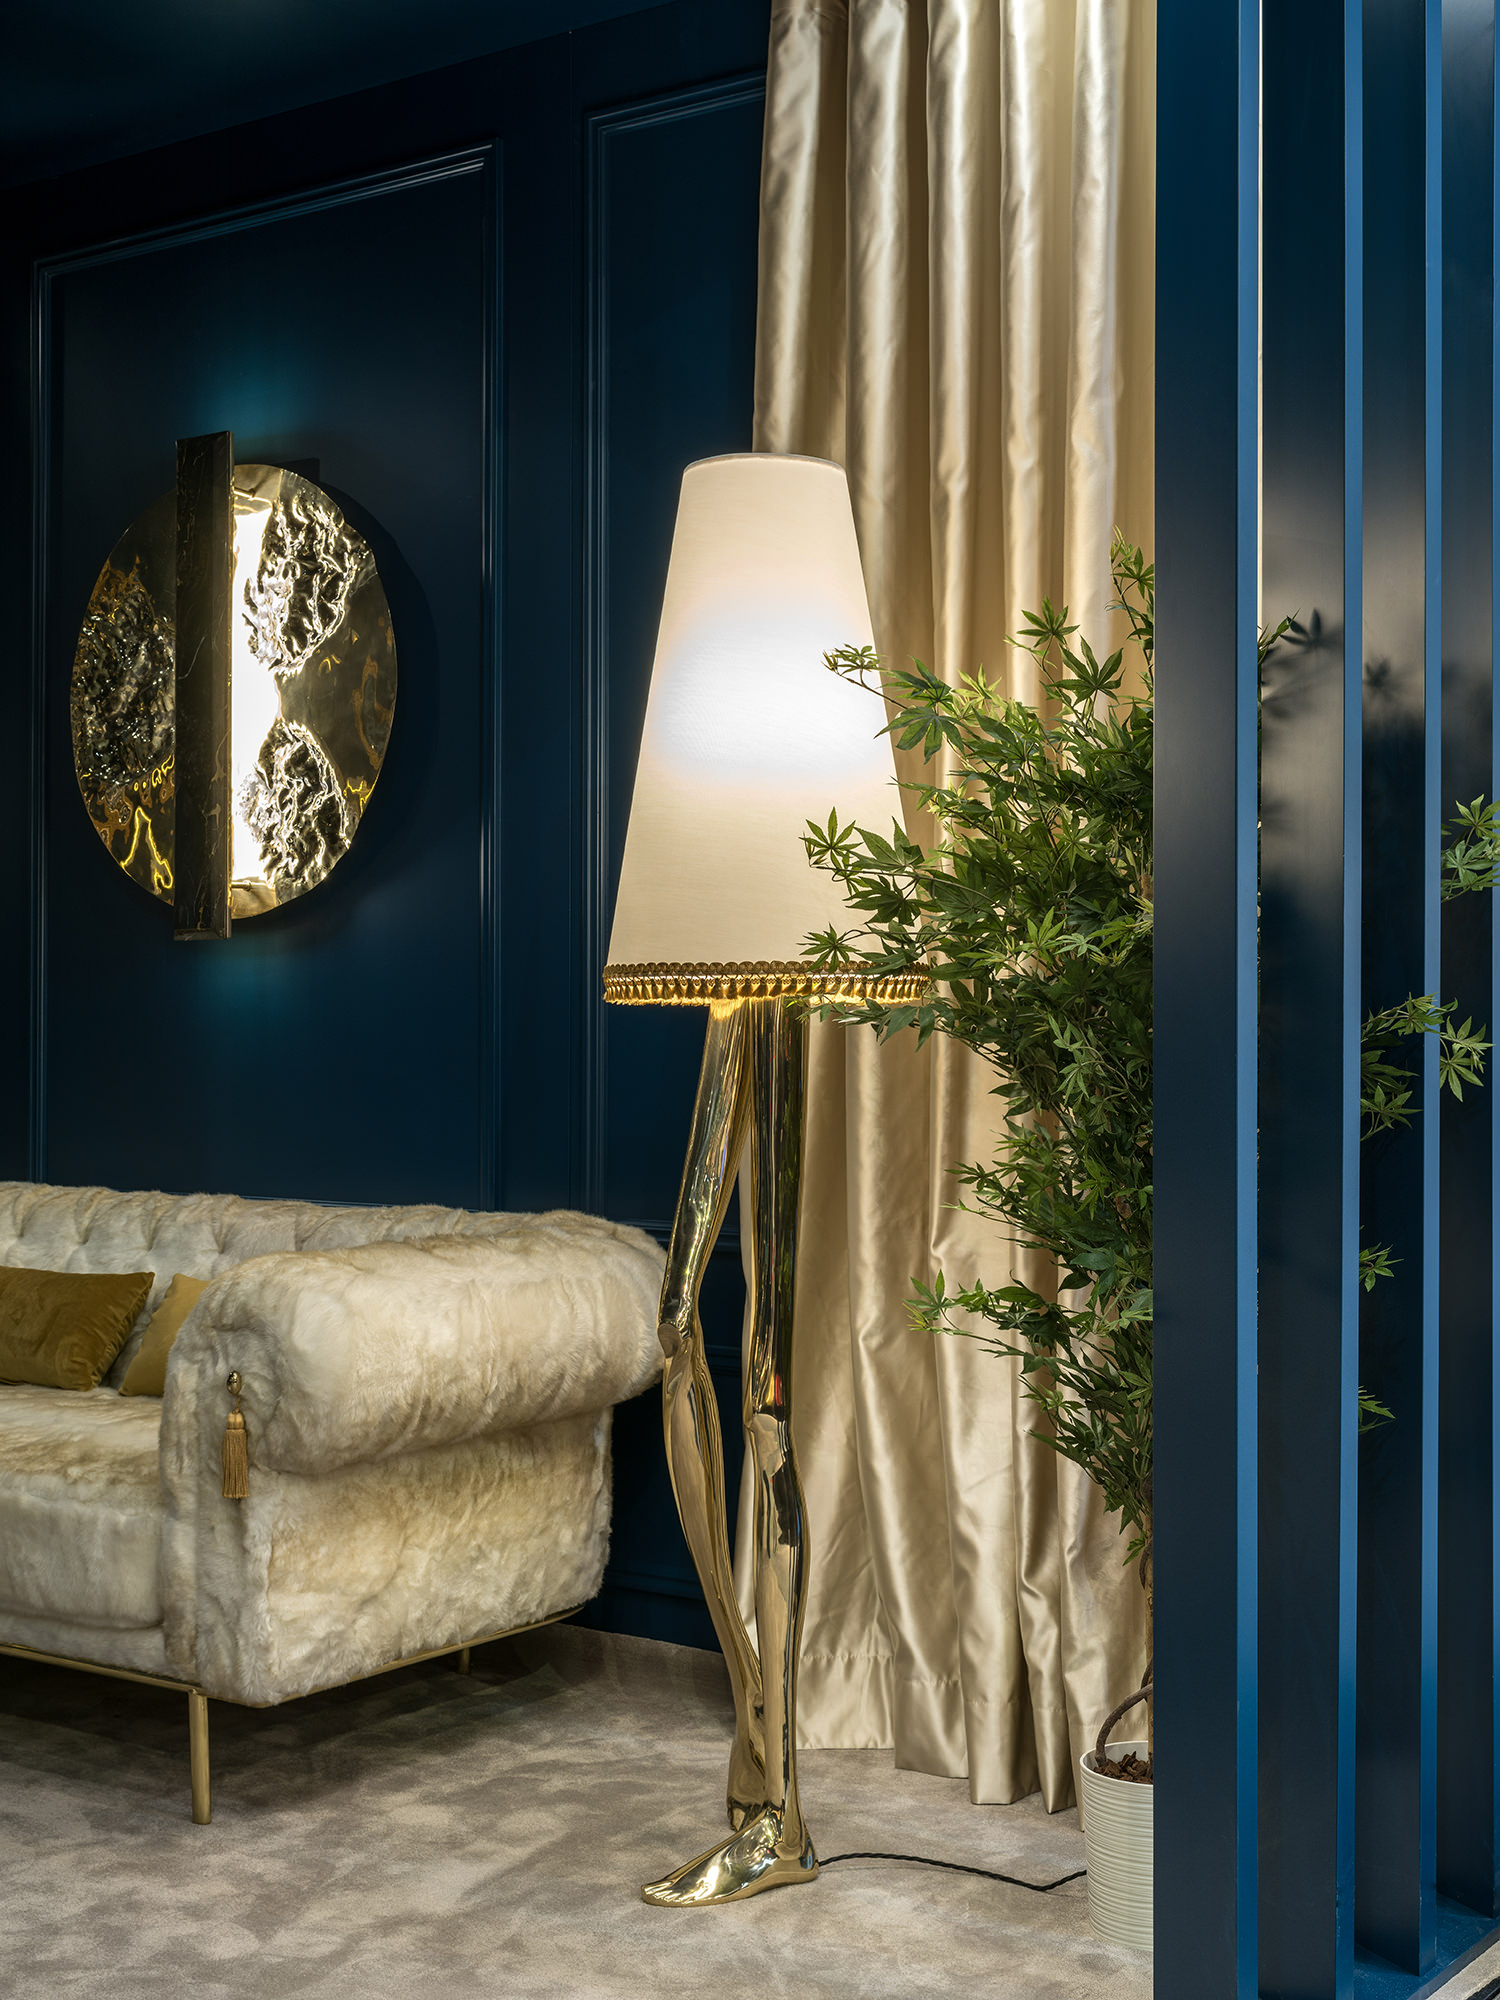 Transform your home with our selection of stunning contemporary designer lighting choices. Explore the full range here.